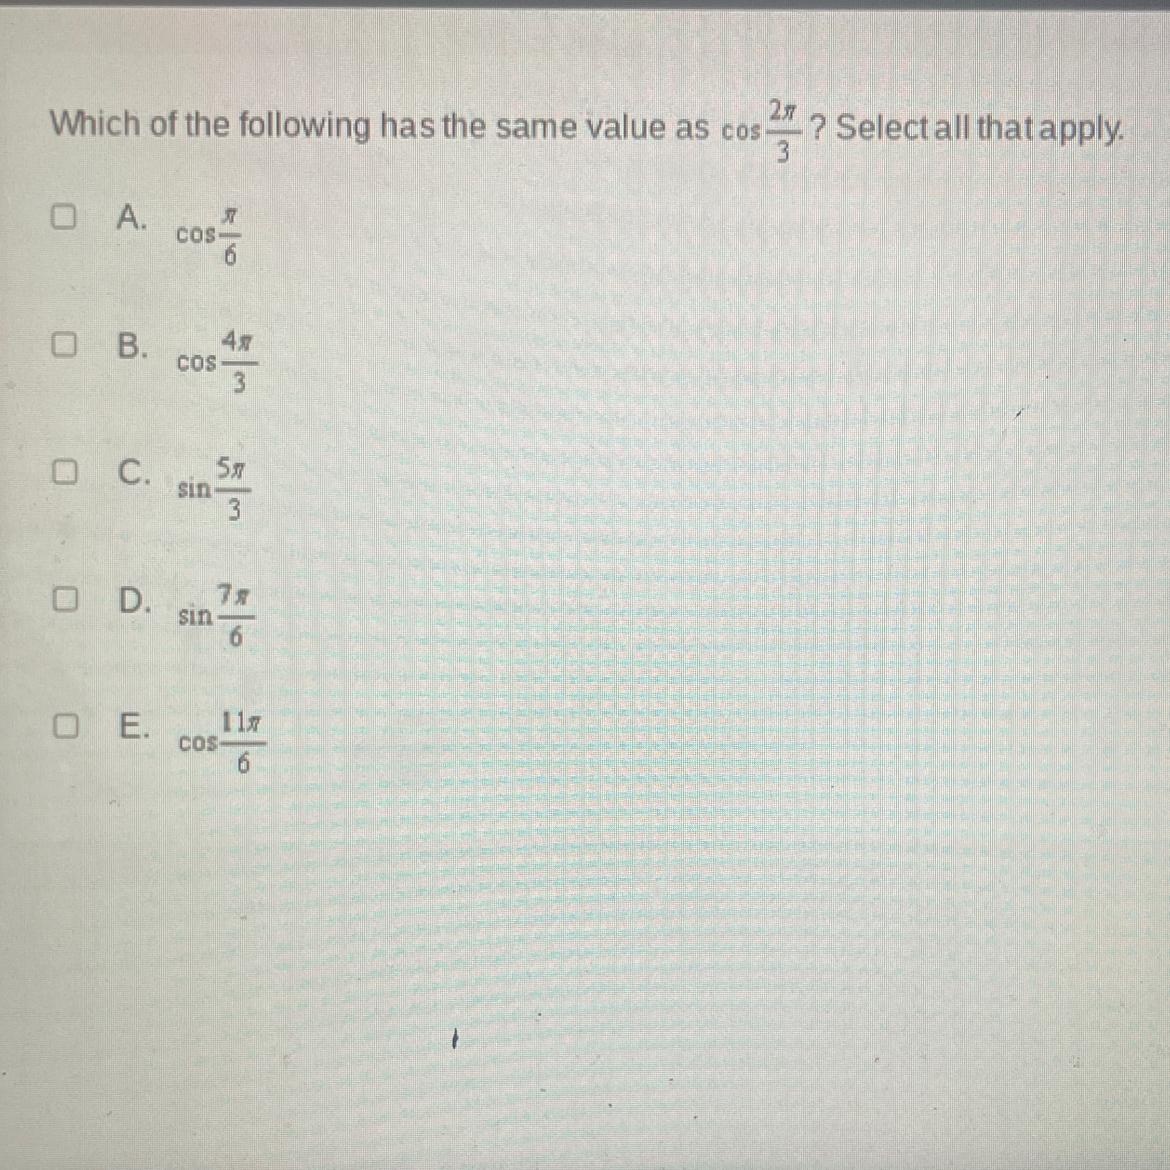 Which Of The Following Has The Same Value As Cos 2pi/3